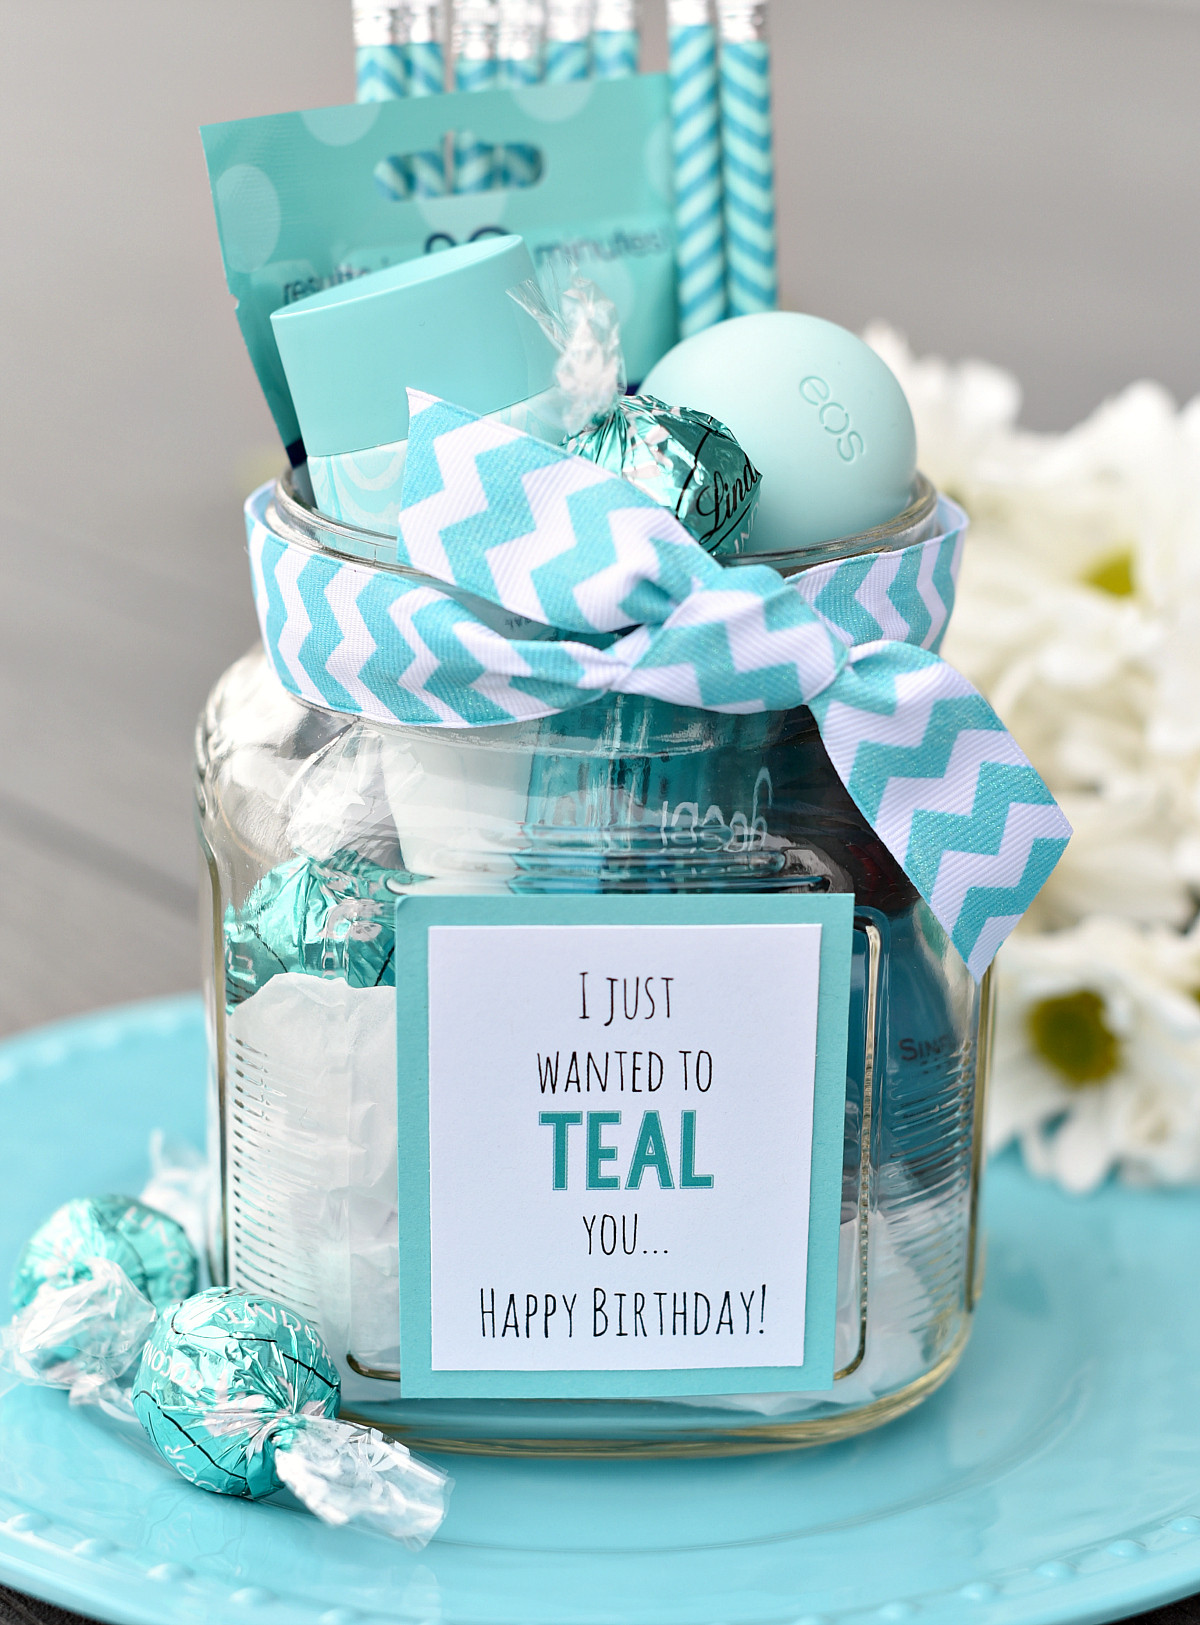 Gift Basket Ideas For Friends Birthday
 Teal Birthday Gift Idea for Friends – Fun Squared